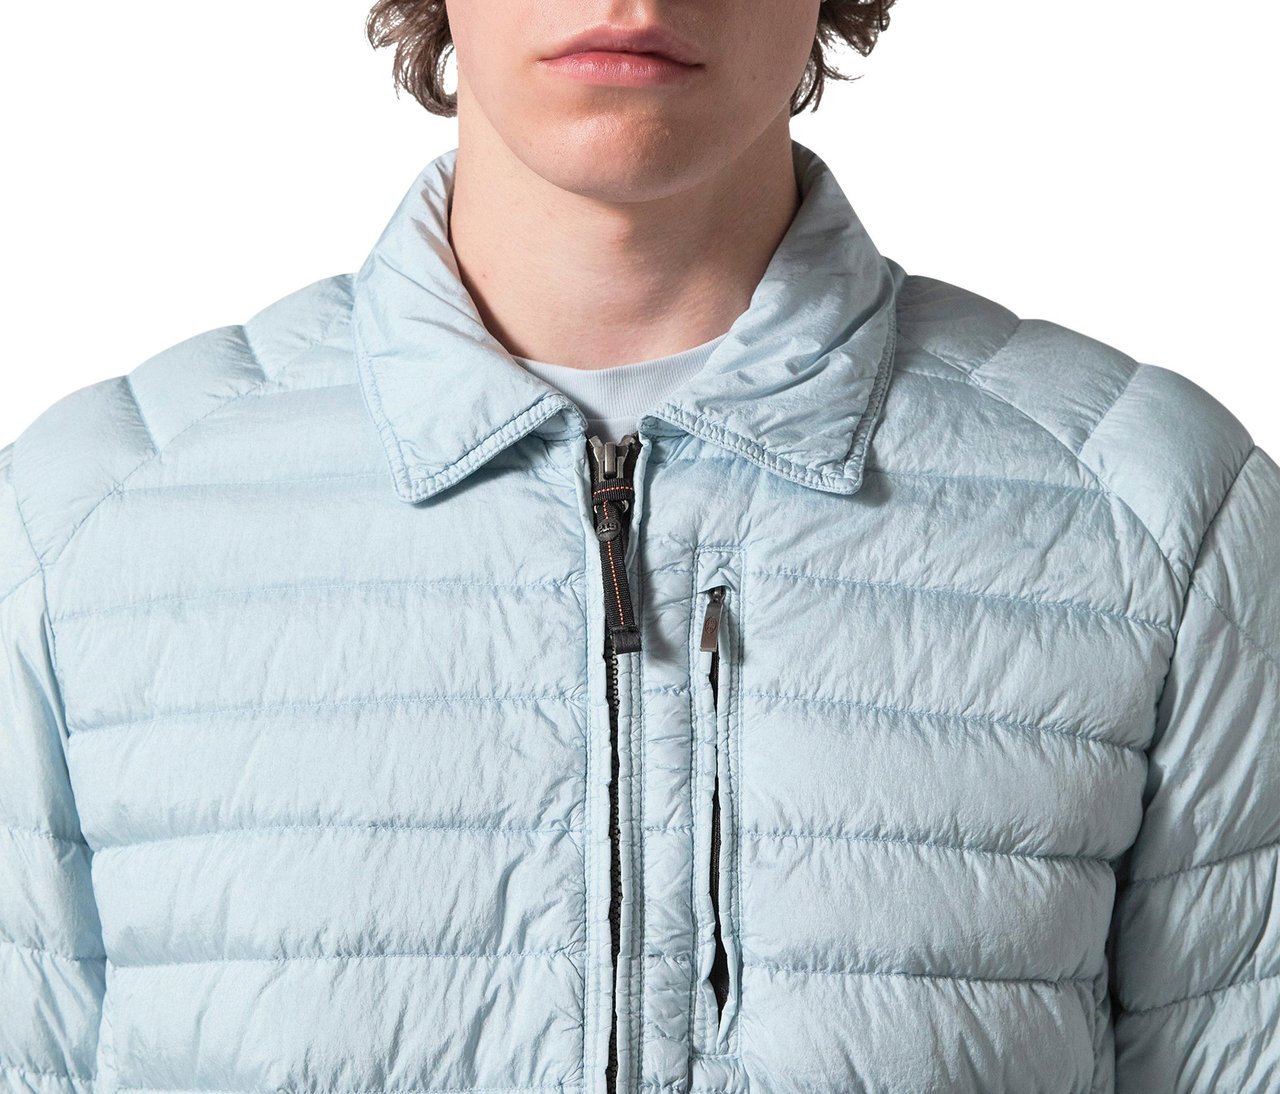 Parajumpers Ling Down Zomerjas Reloaded Superlight Blauw